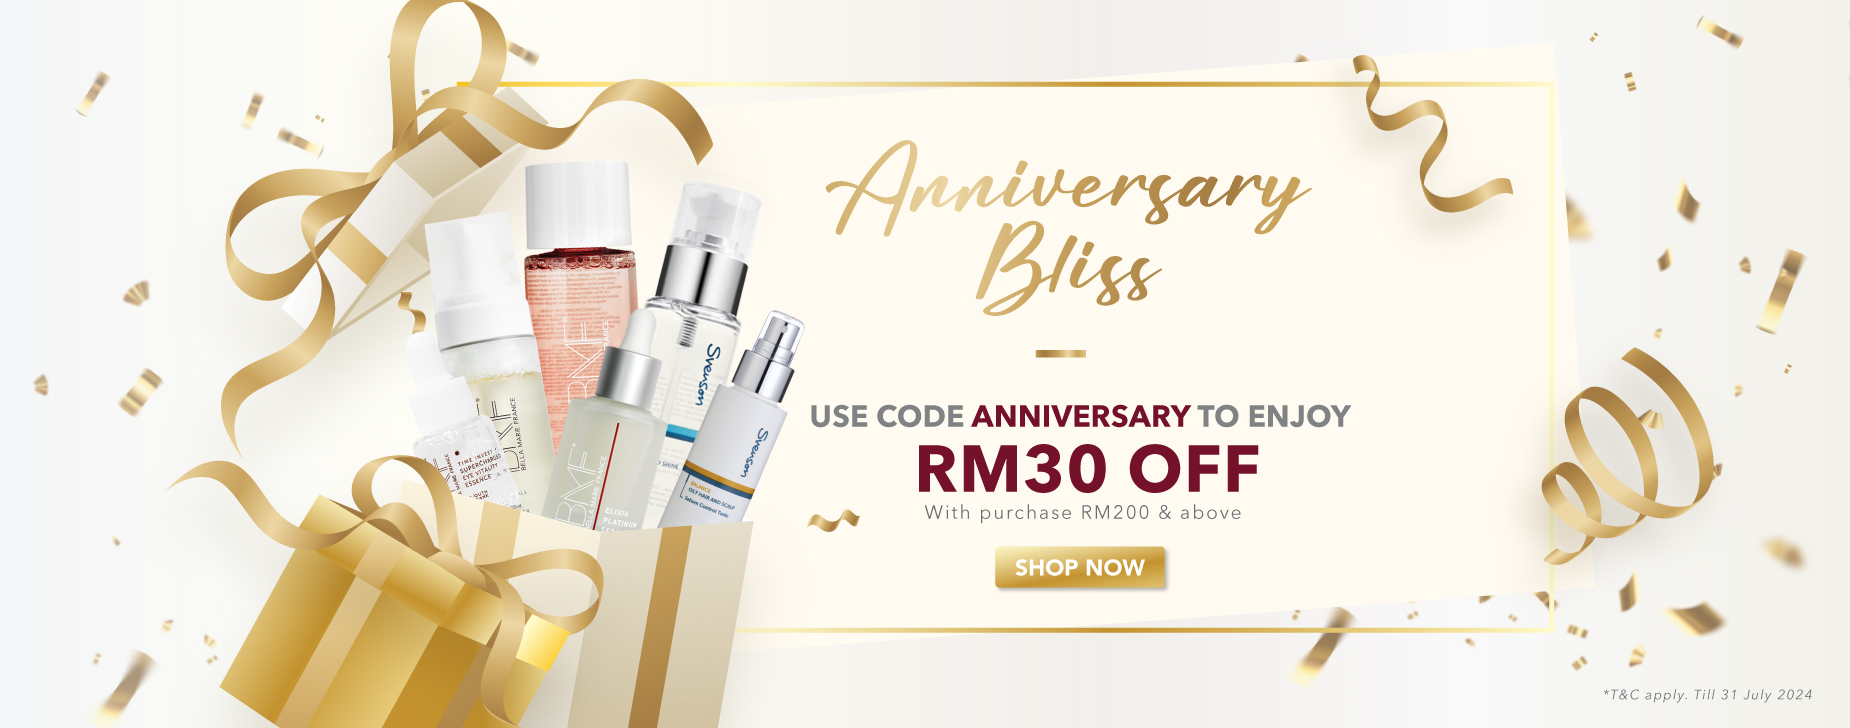 68th Anniversary Promotion